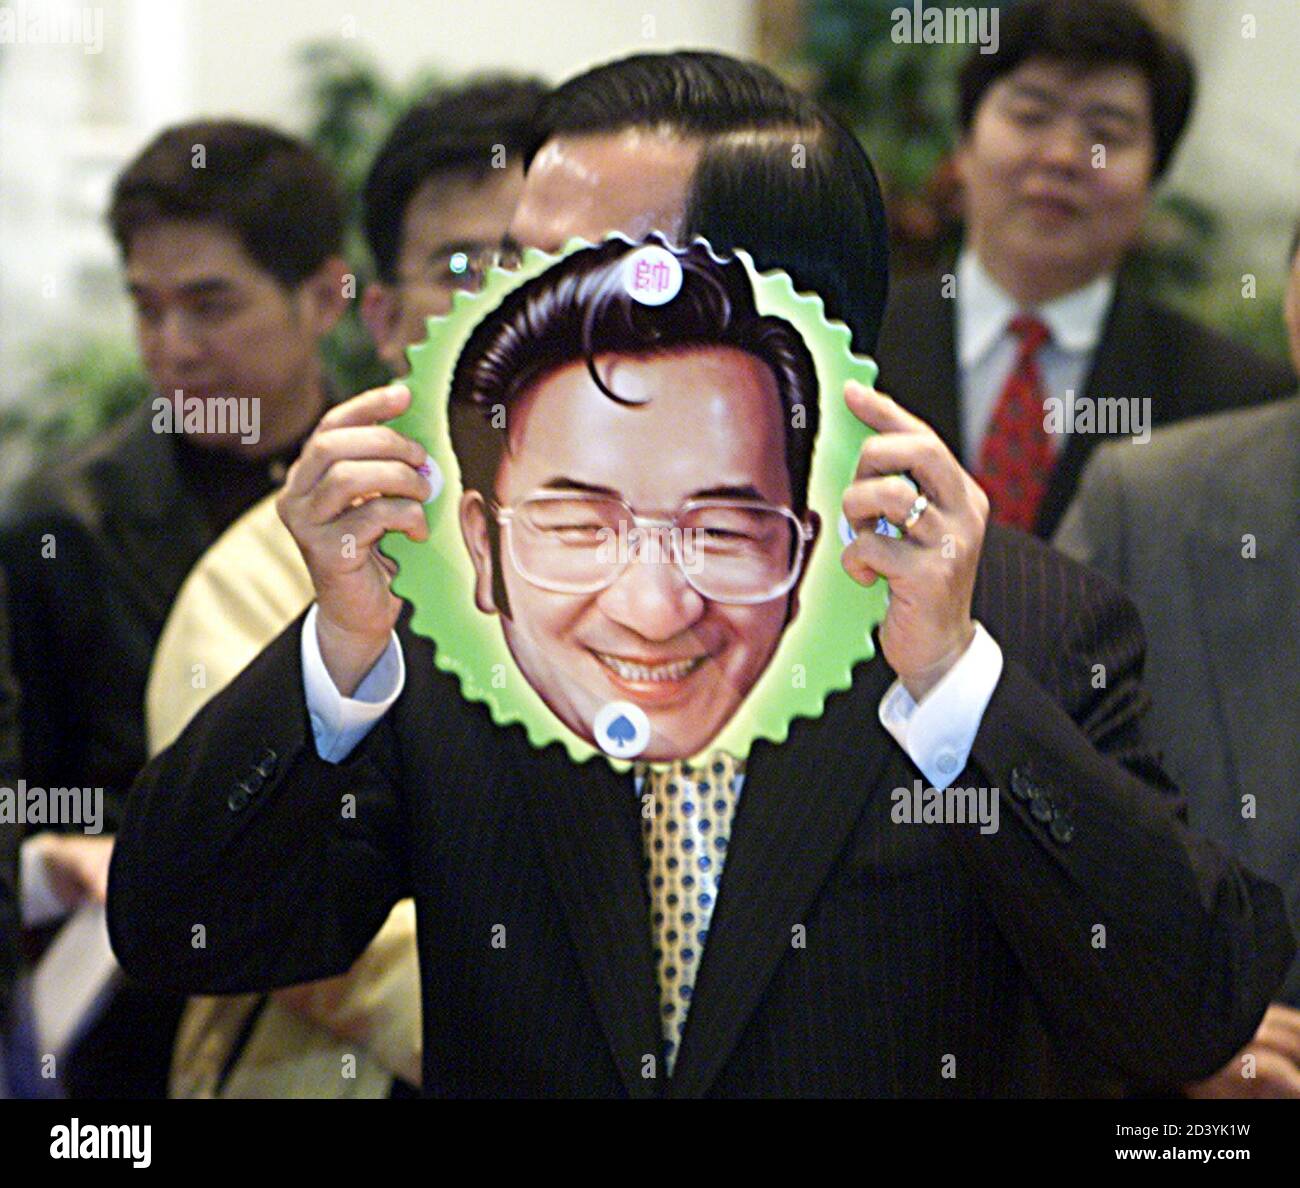 Taiwan President Chen Shui-bian holds up a 'Elvis Presley-style' mask of himself as a group of carcaturists look on at the Presidential Palace in Taipei on March 18, 2003, the third-year anniversary of his election. Analysts say domestic issues, especially Taiwan's slowly recovering economy, will be key to his re-election bid in 2004. REUTERS/Simon Kwong  SK/PB Stock Photo